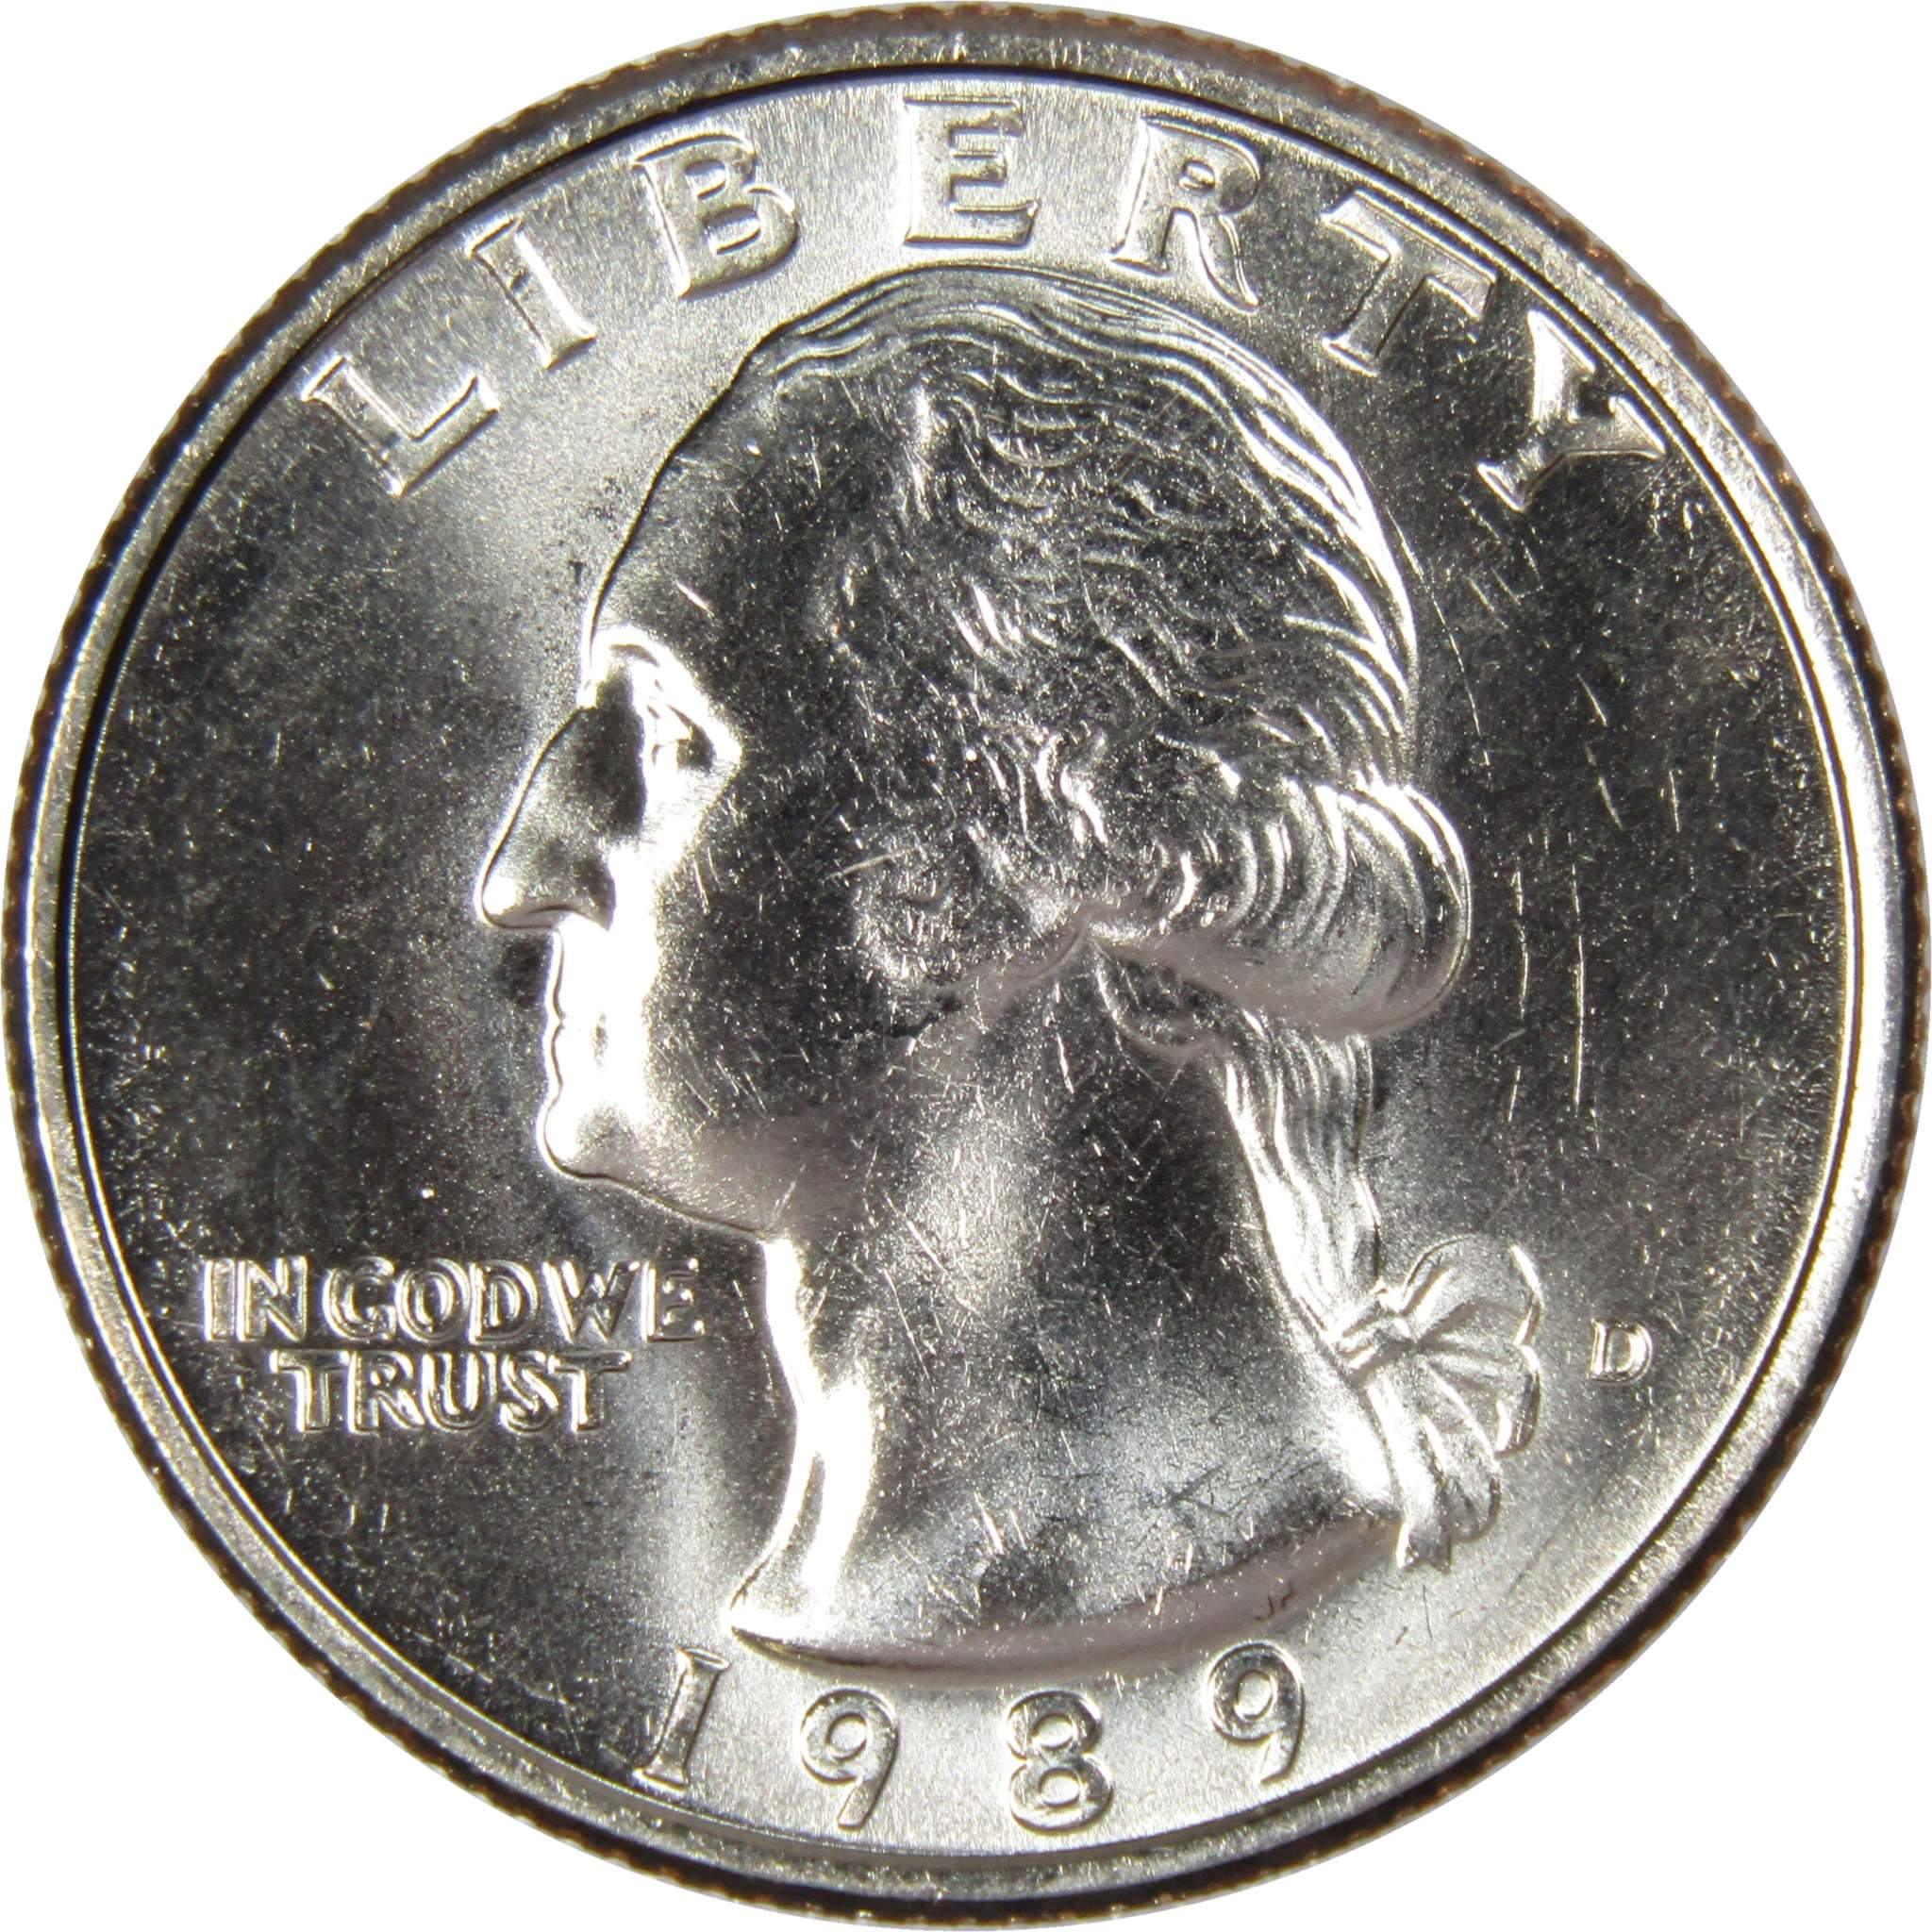 1989 D Washington Quarter BU Uncirculated Mint State 25c US Coin Collectible